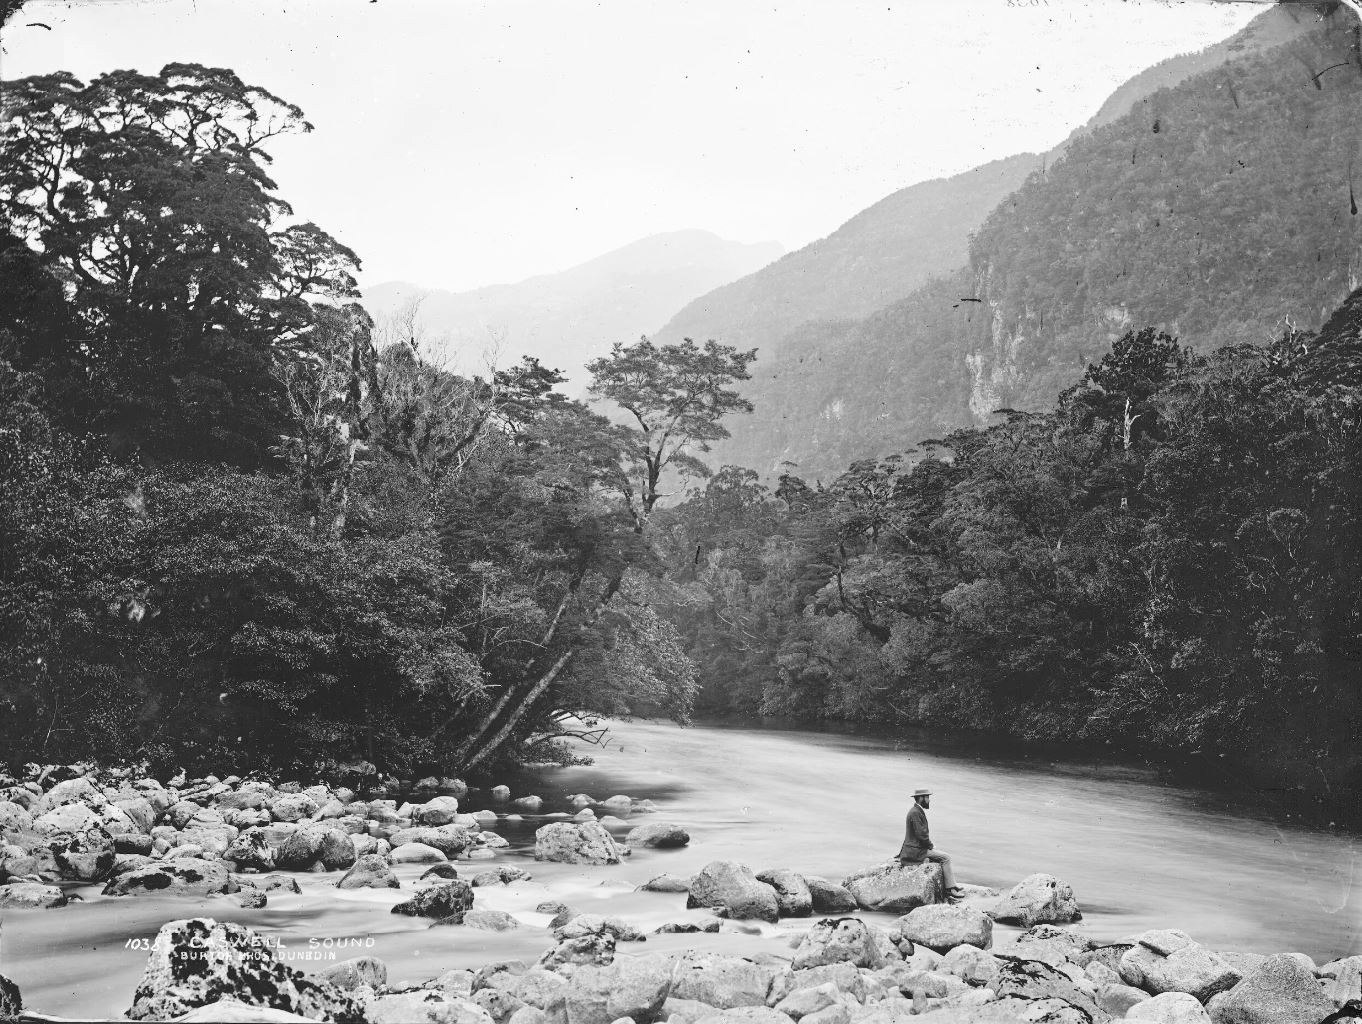 A man sits on a rock by the river